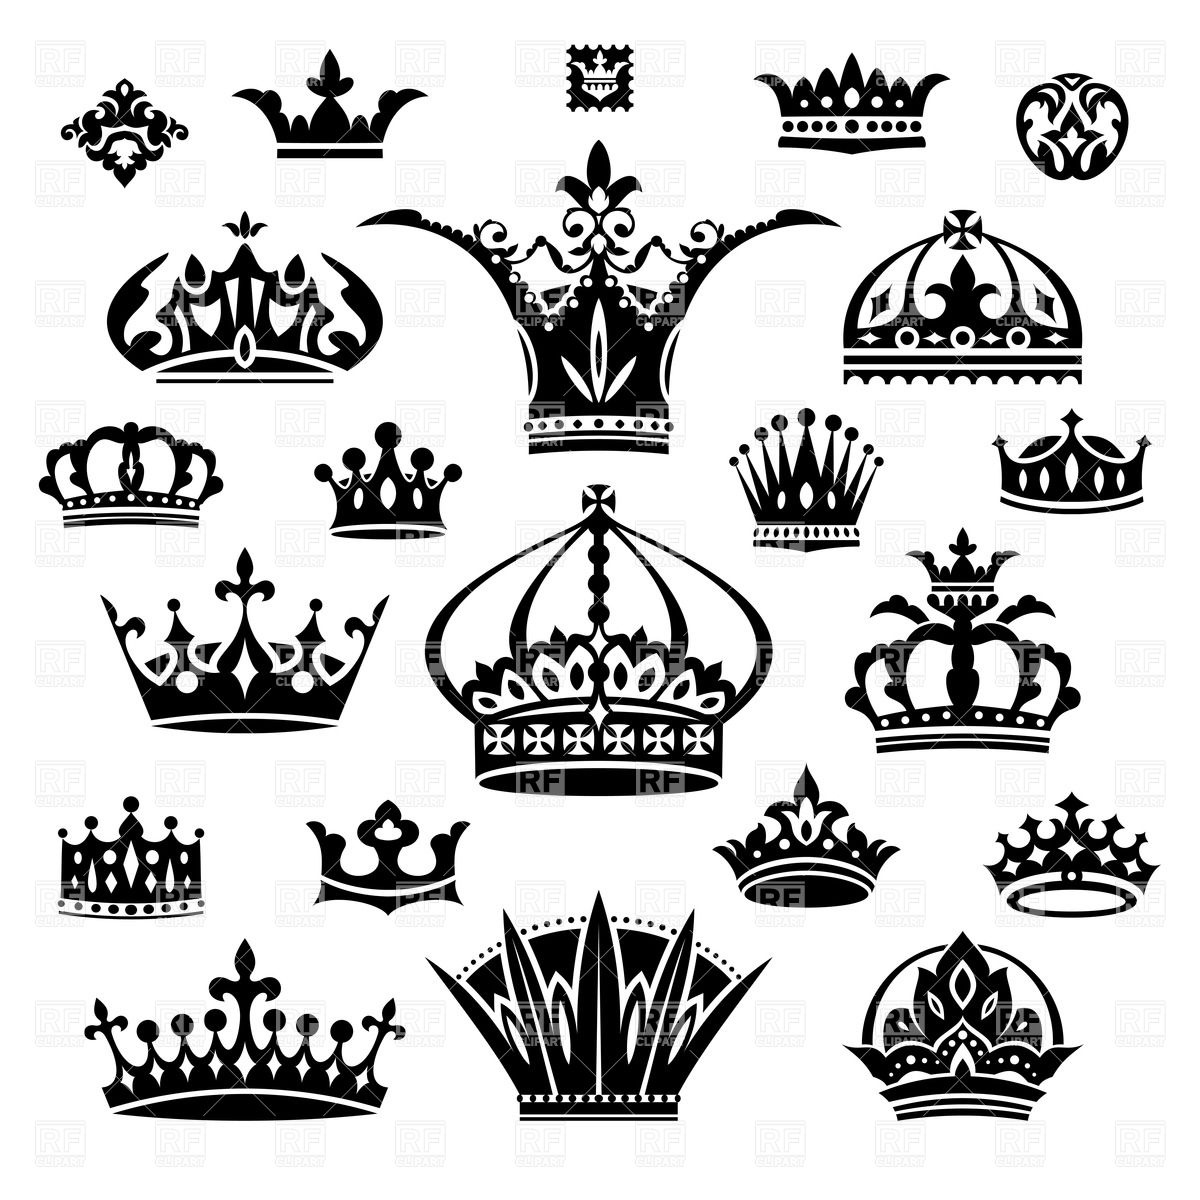 Crown Silhouettes 37061 Silhouettes Outlines Download Royalty Free    